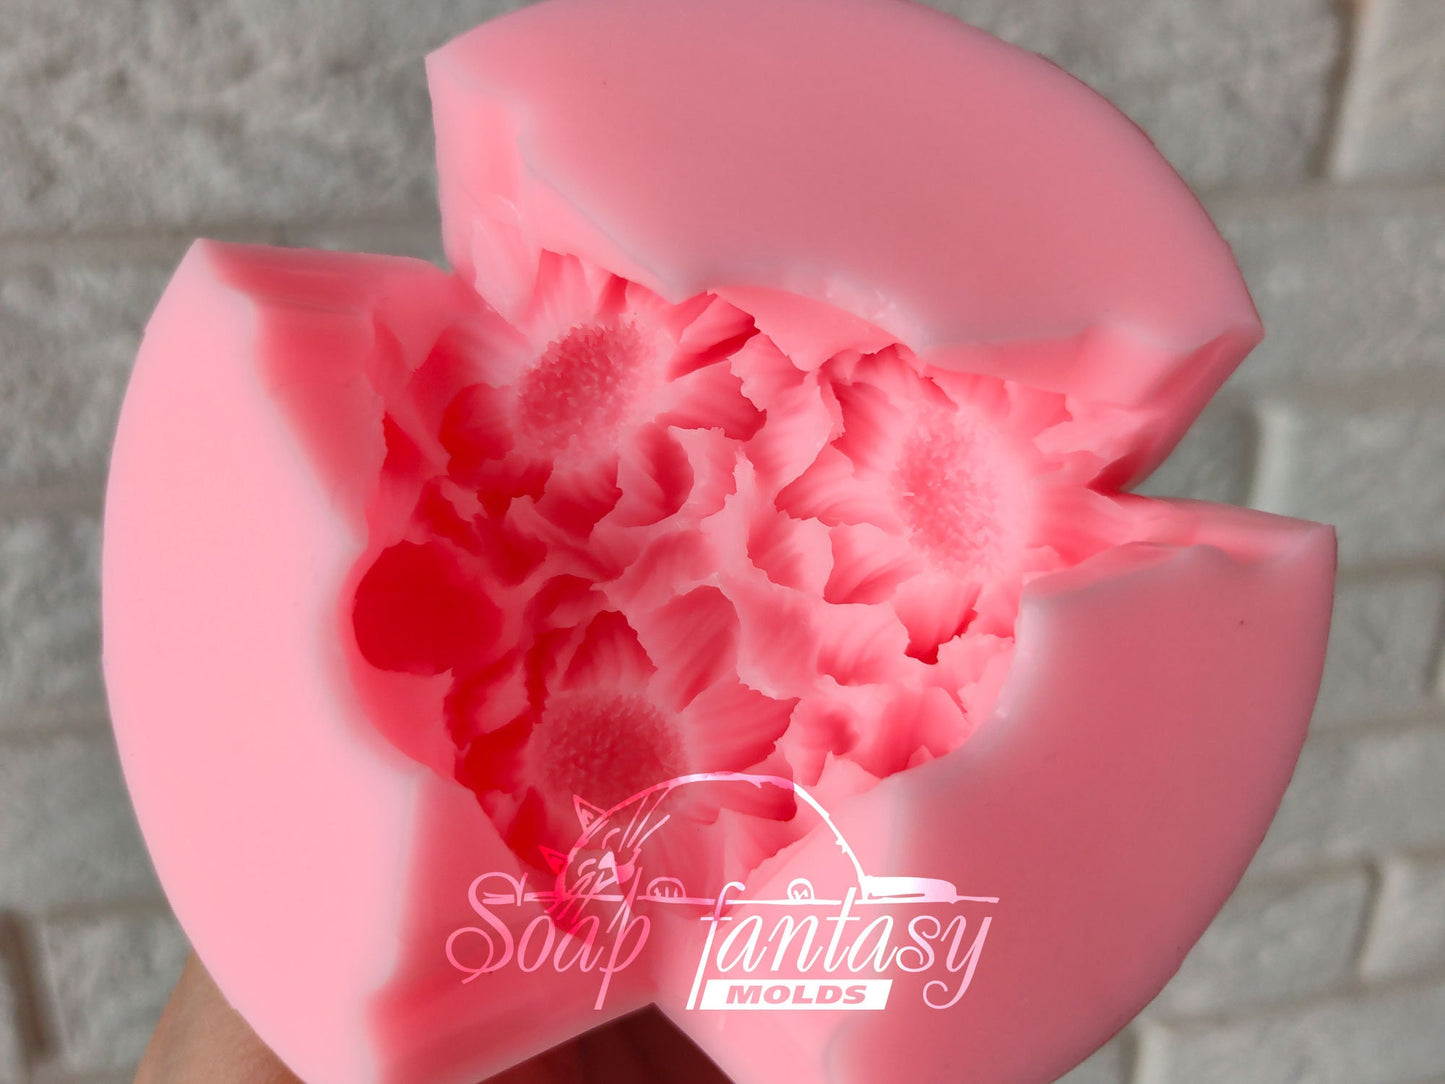 Daisy triplet flower silicone mold for soap making